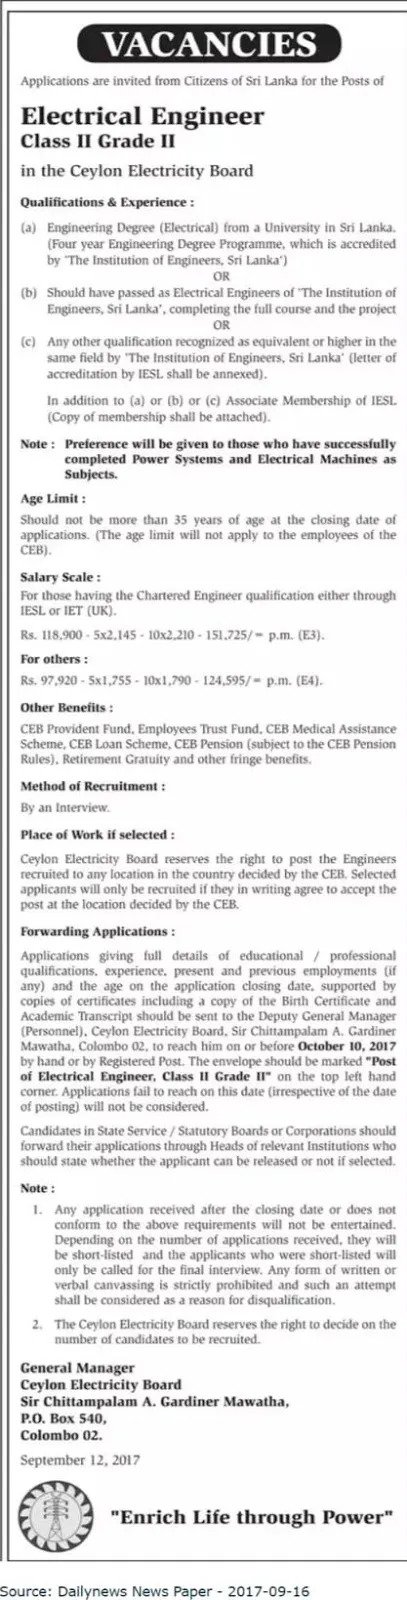 Electrical Engineer Vacancy in Ceylon Electricity Board(CEB)